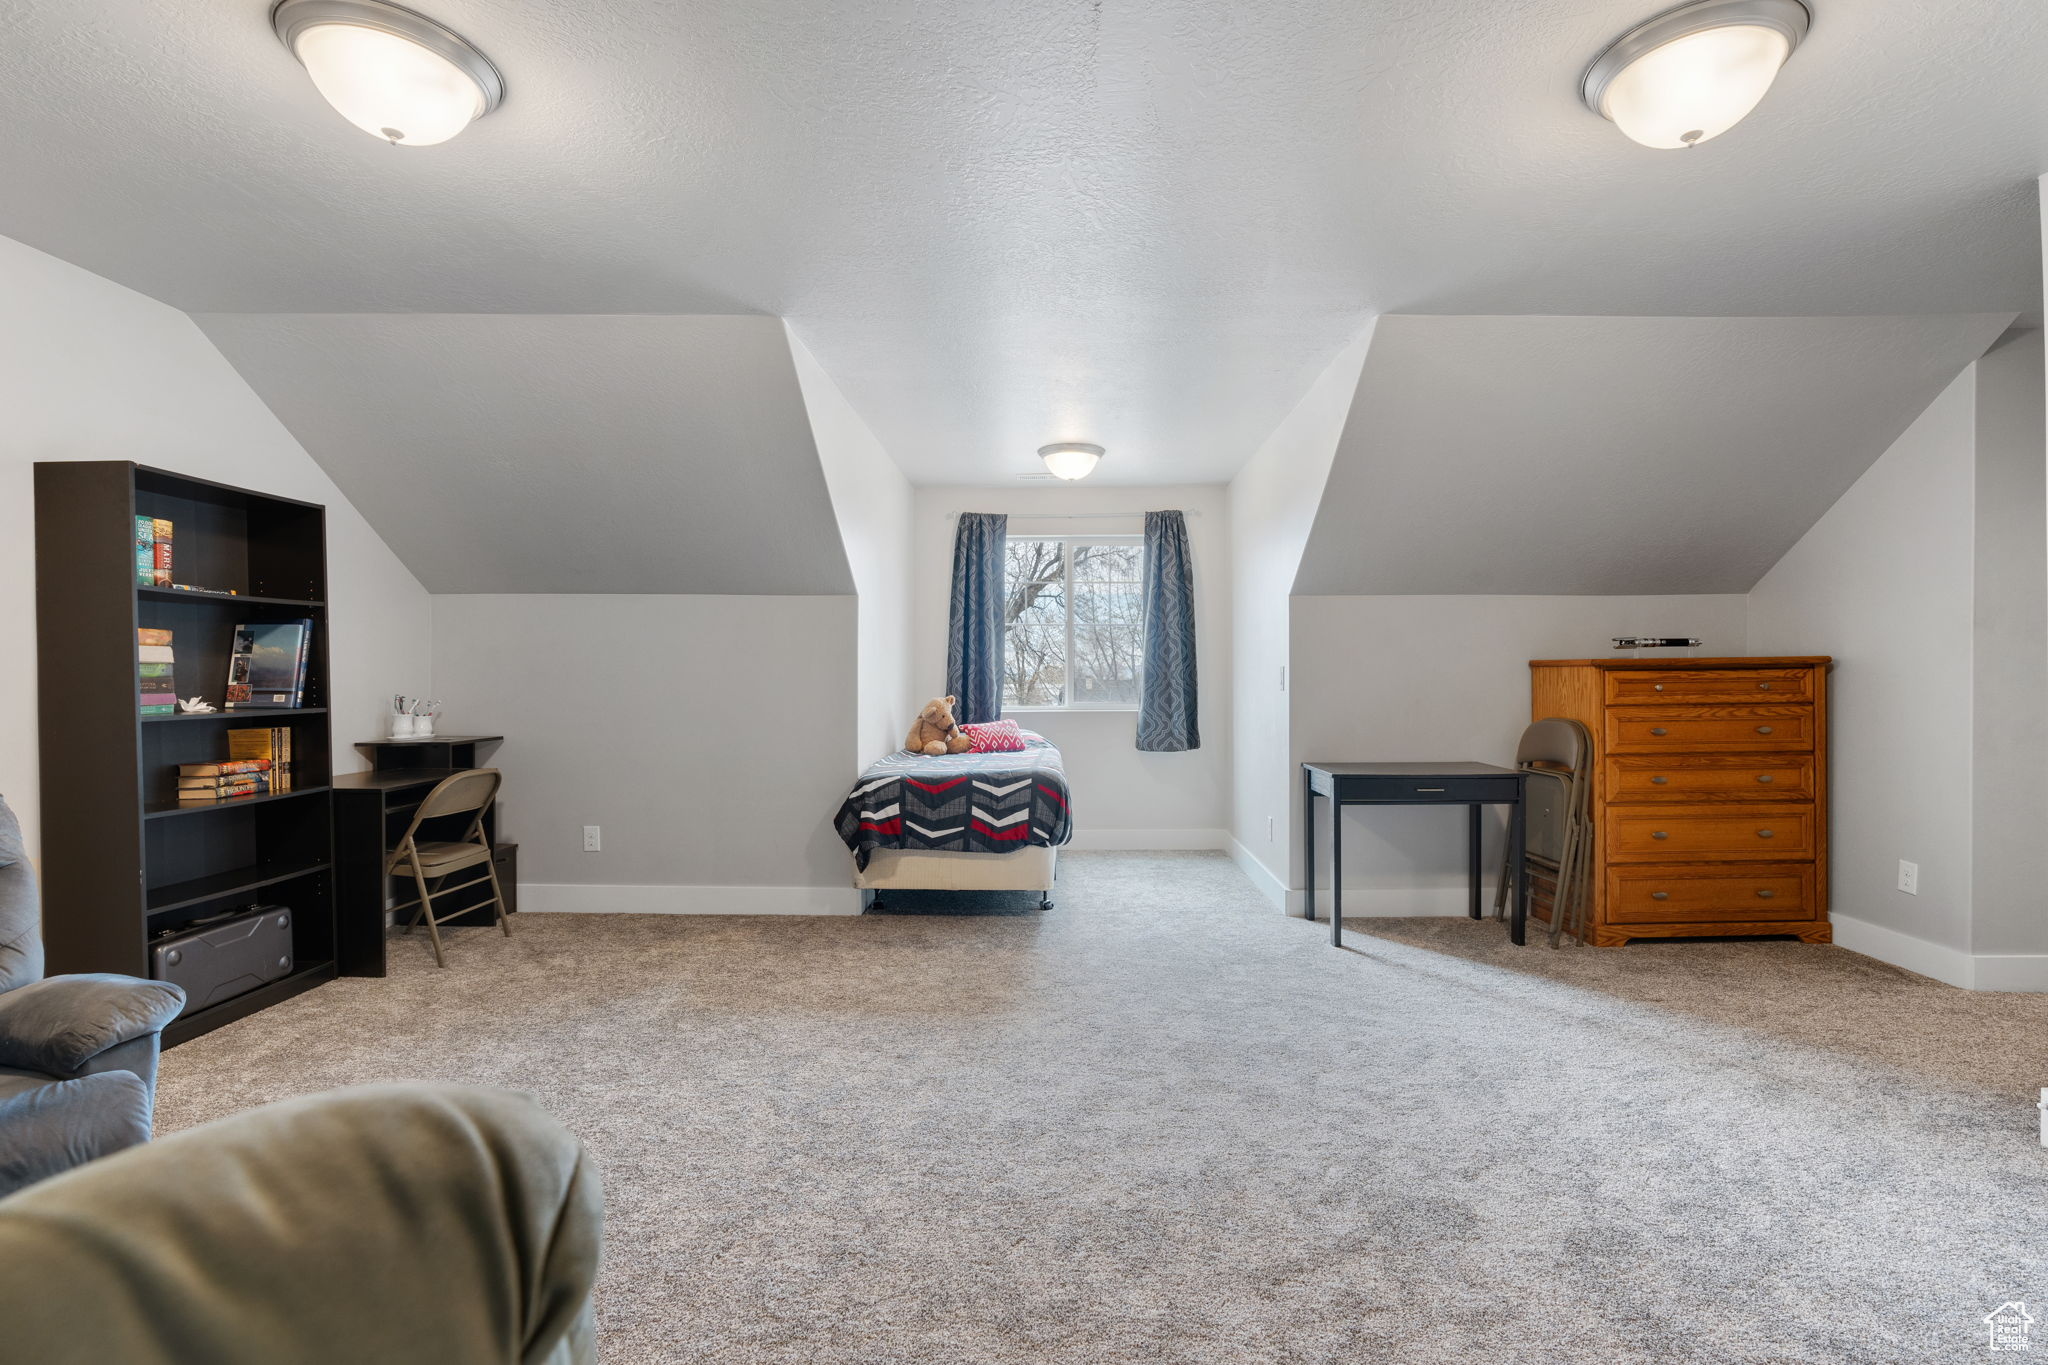 Large bedroom 4 over the garage. Seller has used it for a massive bedroom for multiple kids. Loft style game room, media room, toy room, or family room.